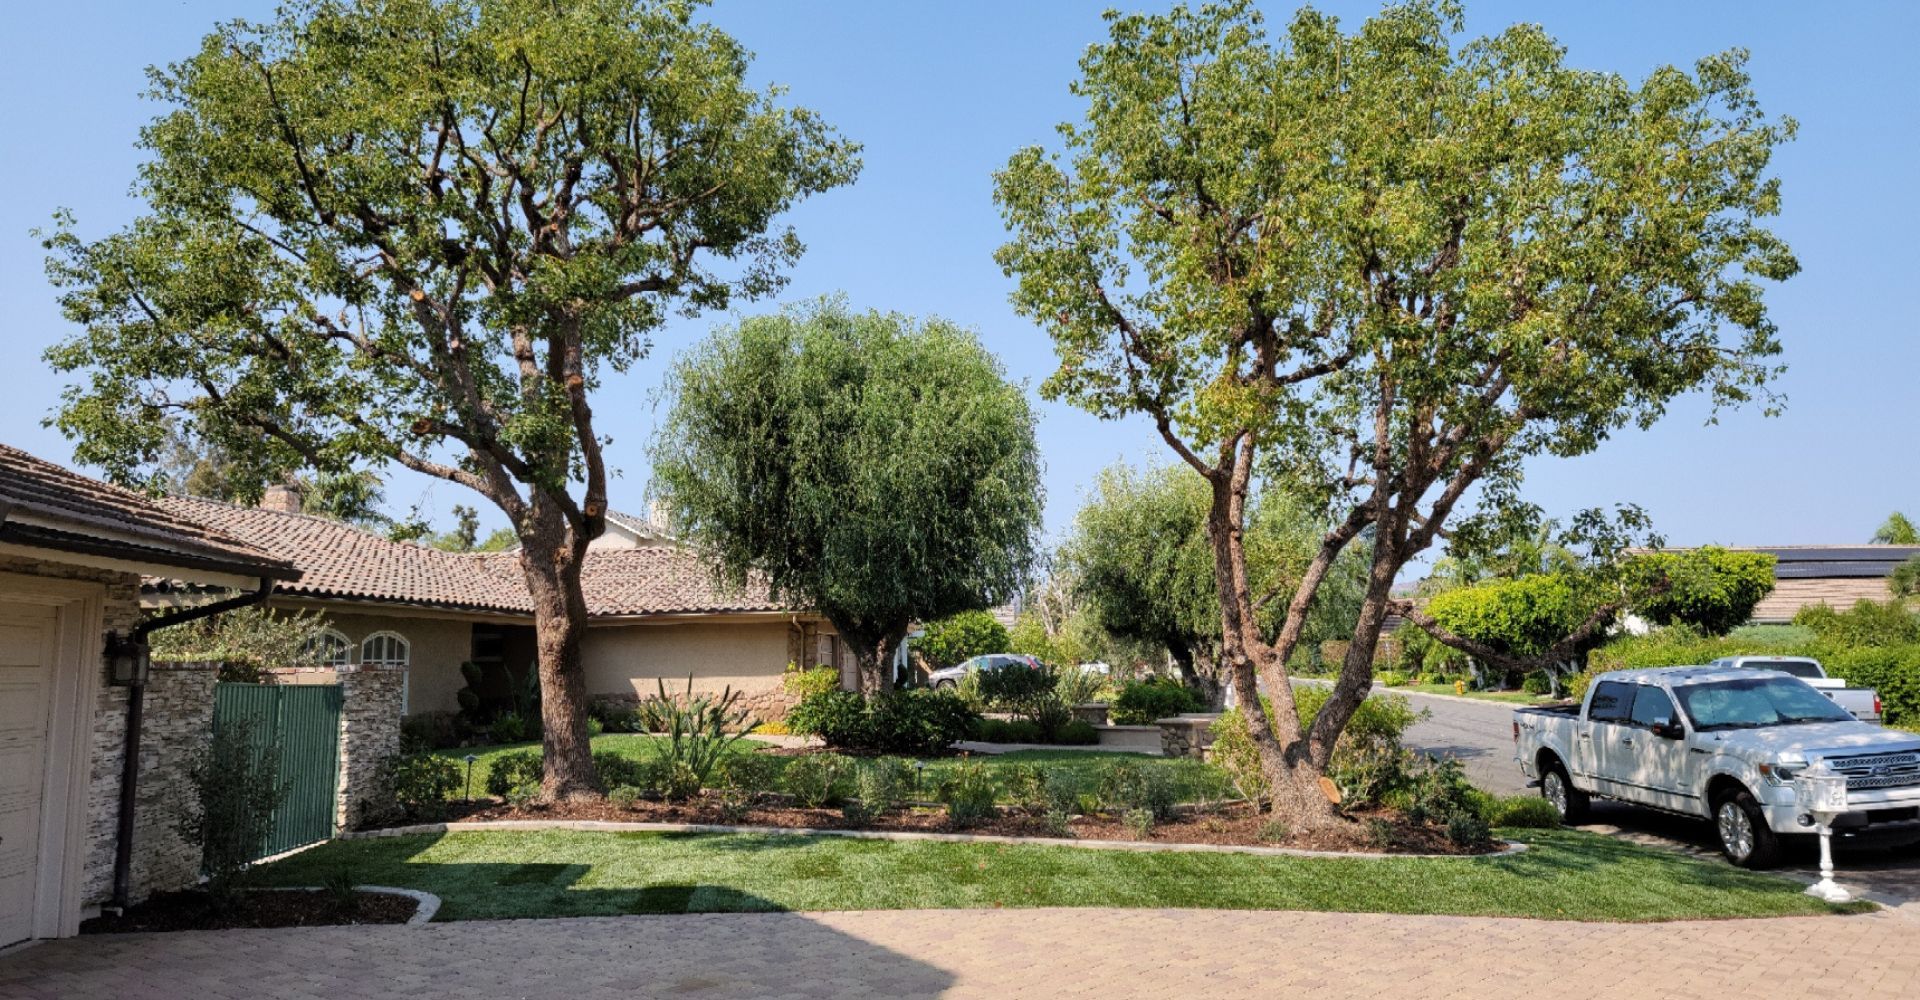 M29300 - Content Marketing Blitz - Creating the Perfect Landscaping for a Small Yard .jpg